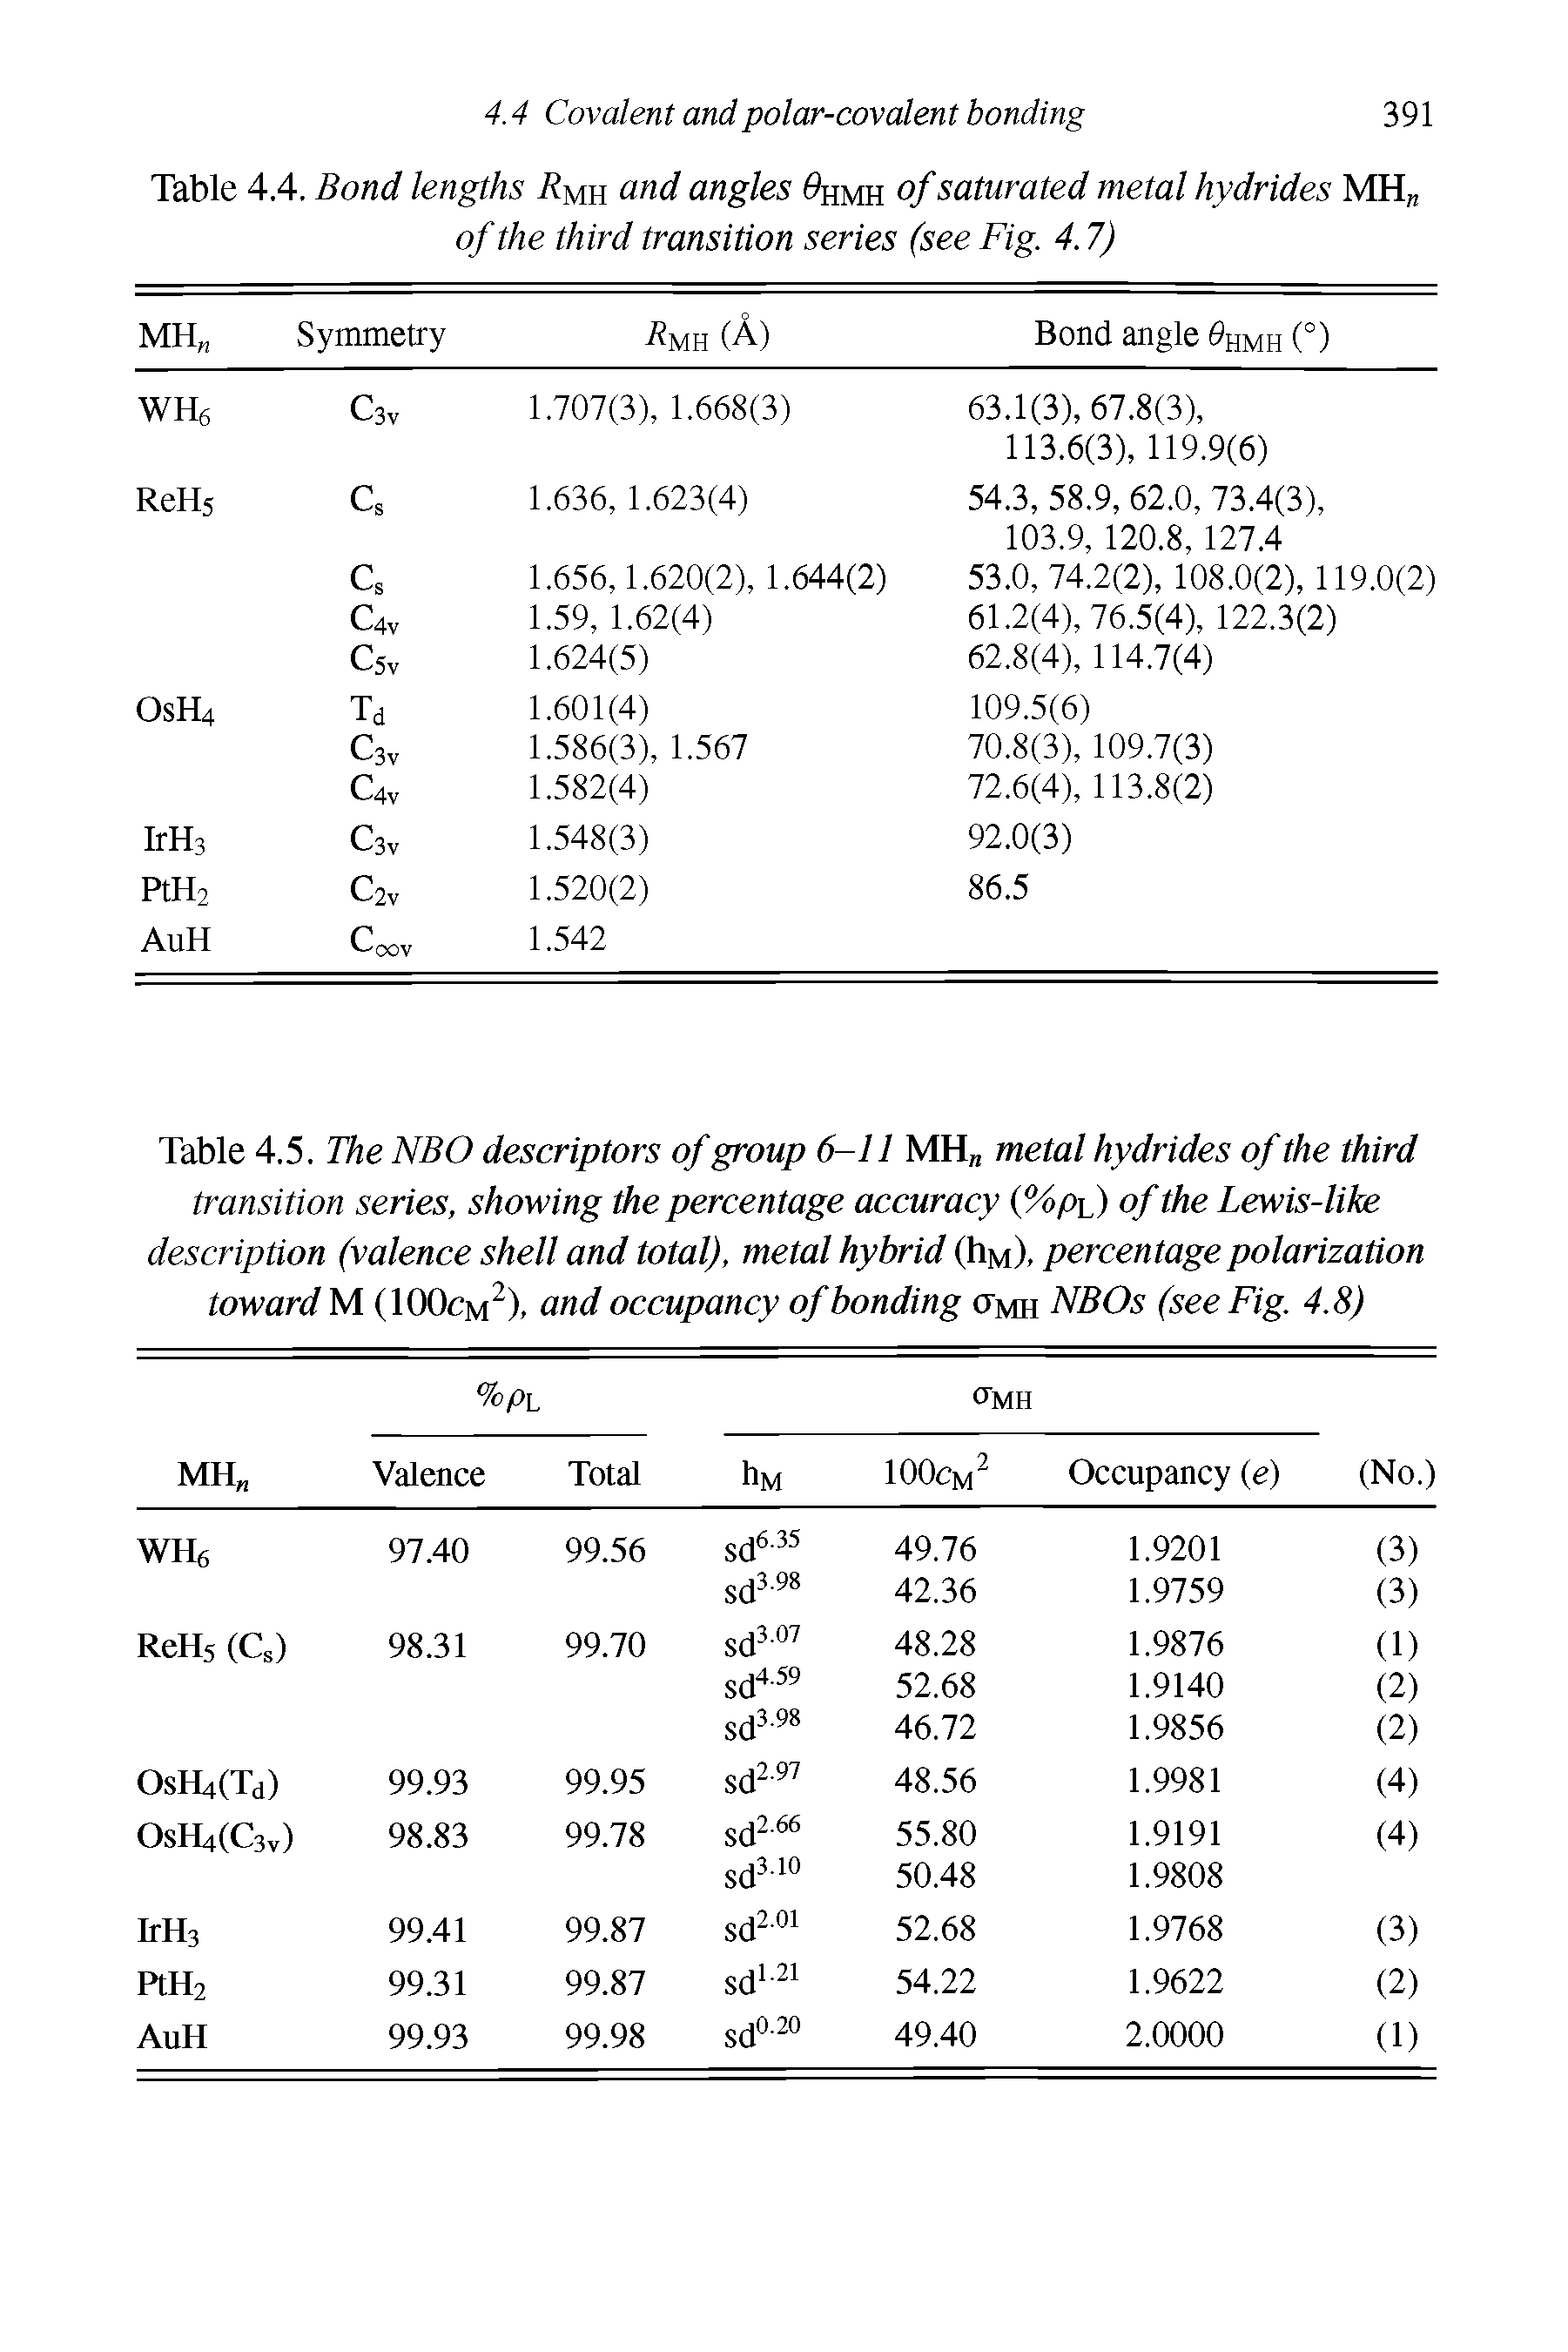 Table 4.4. Bond lengths 7 mh and angles hmh of saturated metal hydrides MH of the third transition series (see Fig. 4.7)...